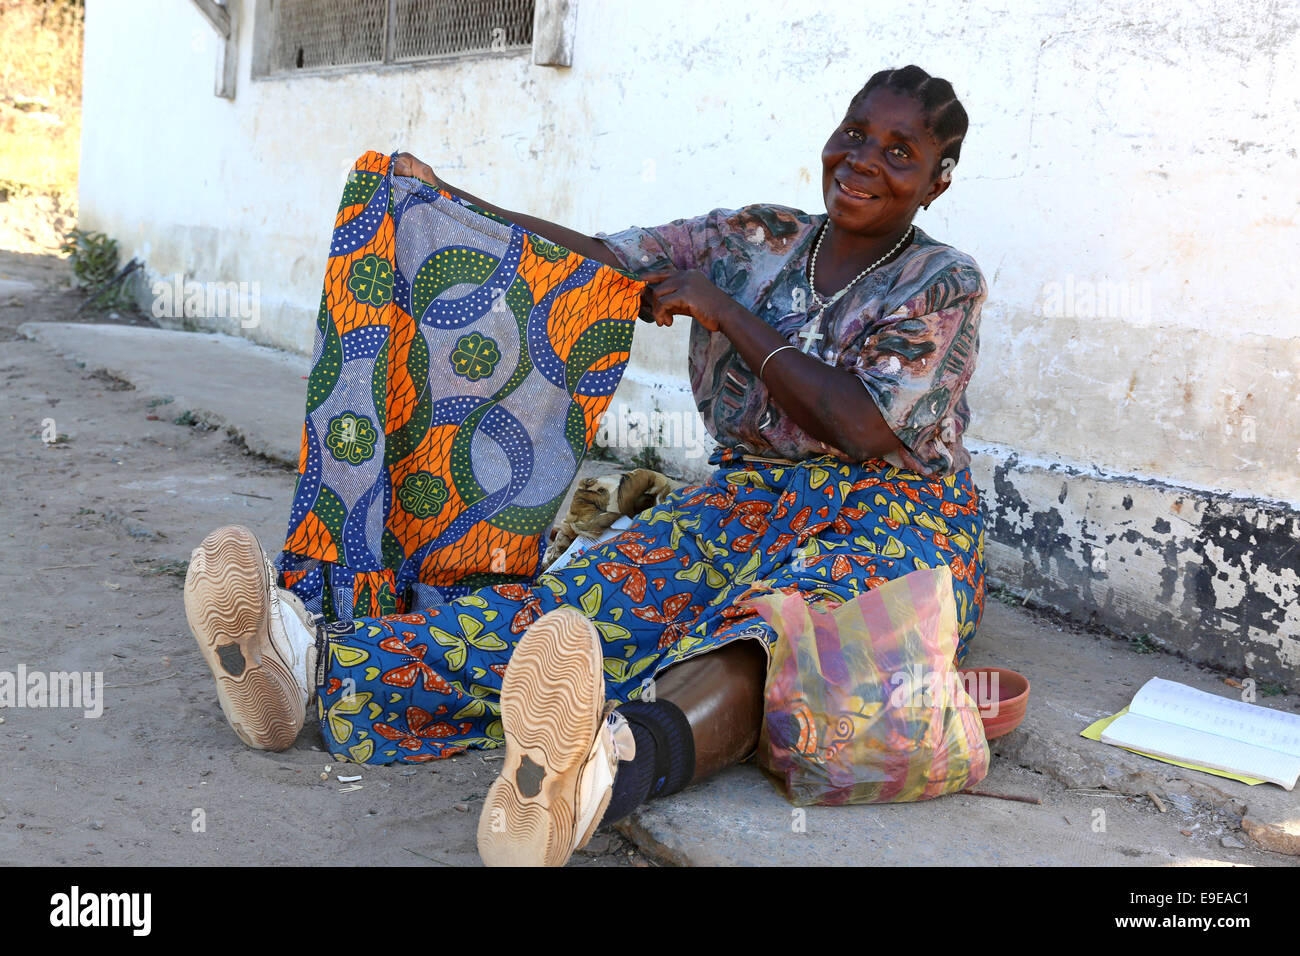 A leprosy sick woman shows her self made skirt in the Chibote Leprosy Rehabilitacion Center in Ibenga, Zambia Stock Photo